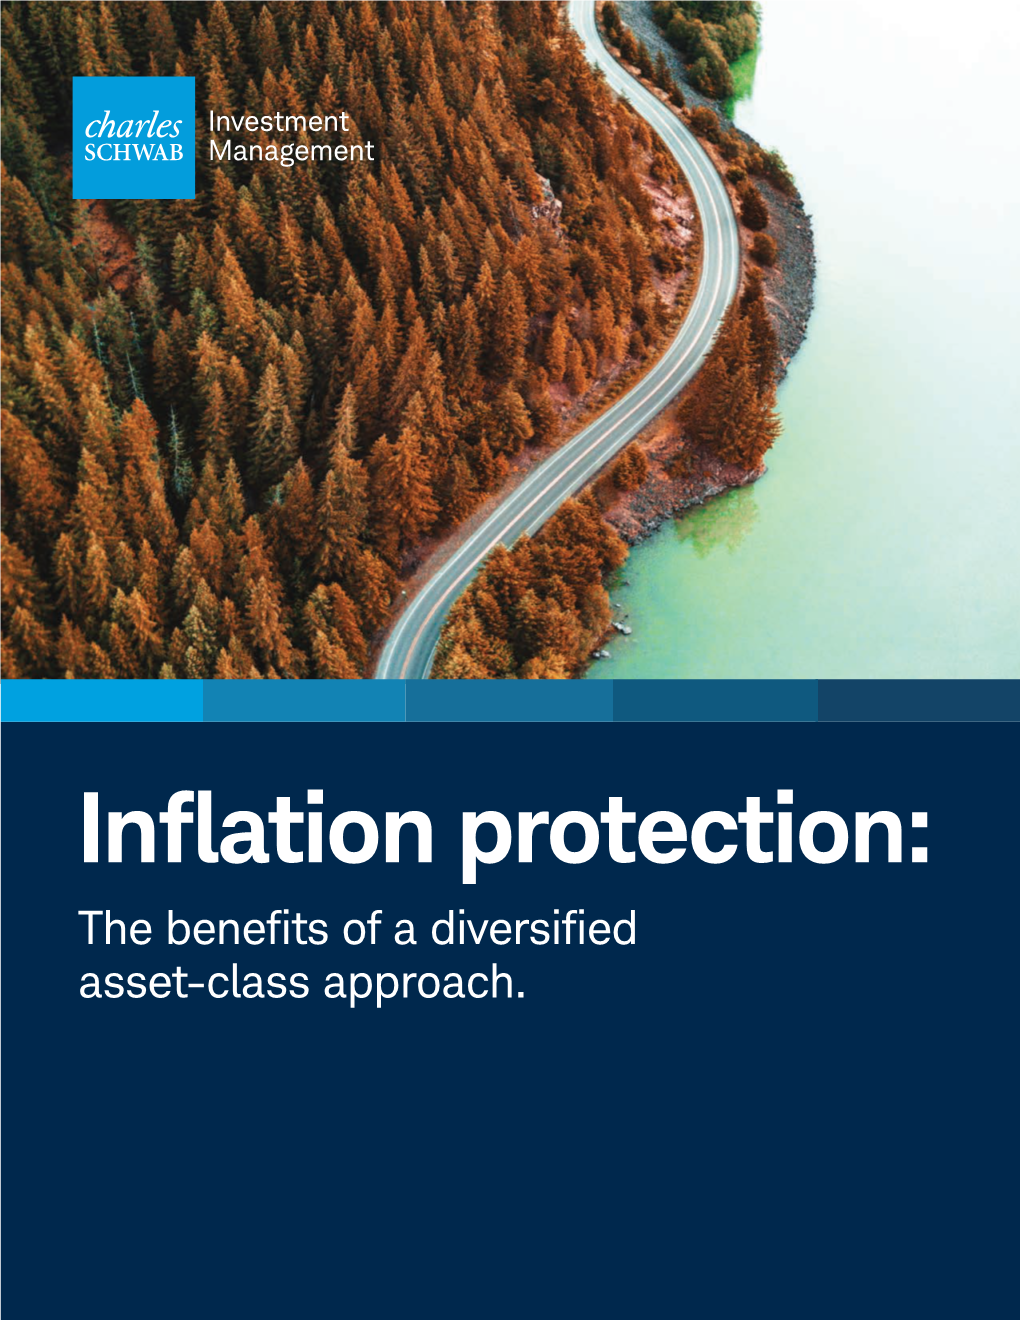 Inflation Protection: the Benefits of a Diversified Asset-Class Approach